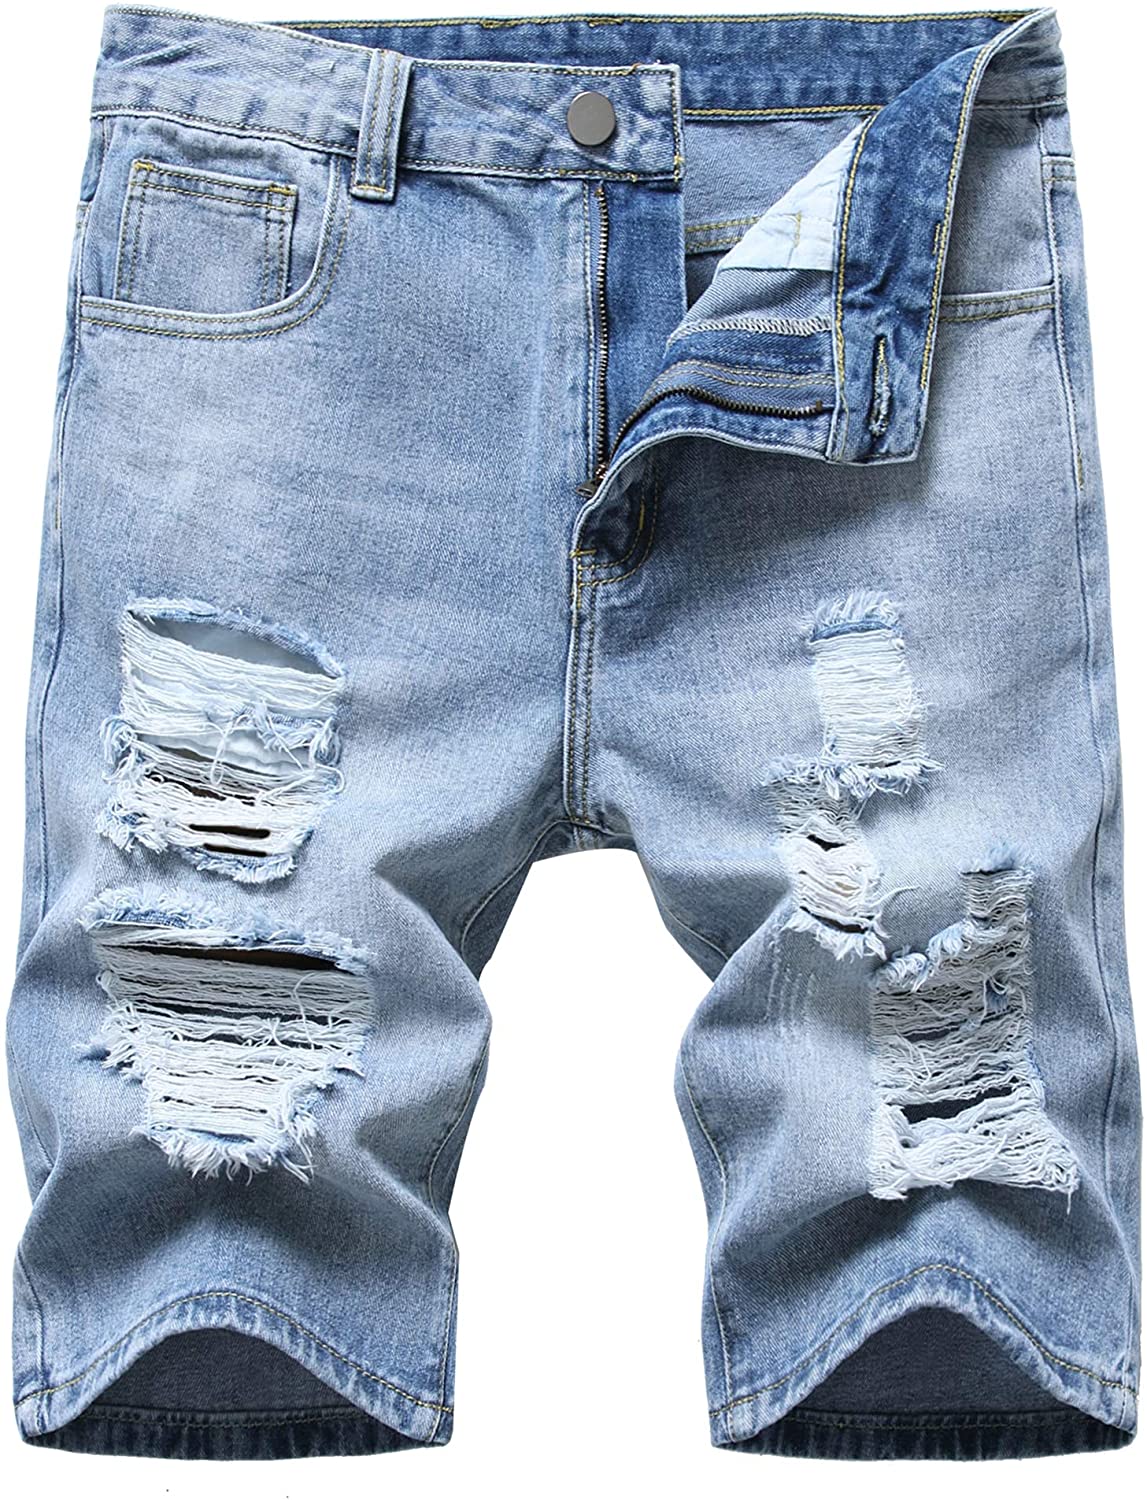 Denim Shorts for Men Summer Vintage Washed Ripped Distressed Straight Fit Knee Length Casual Jean Shorts 